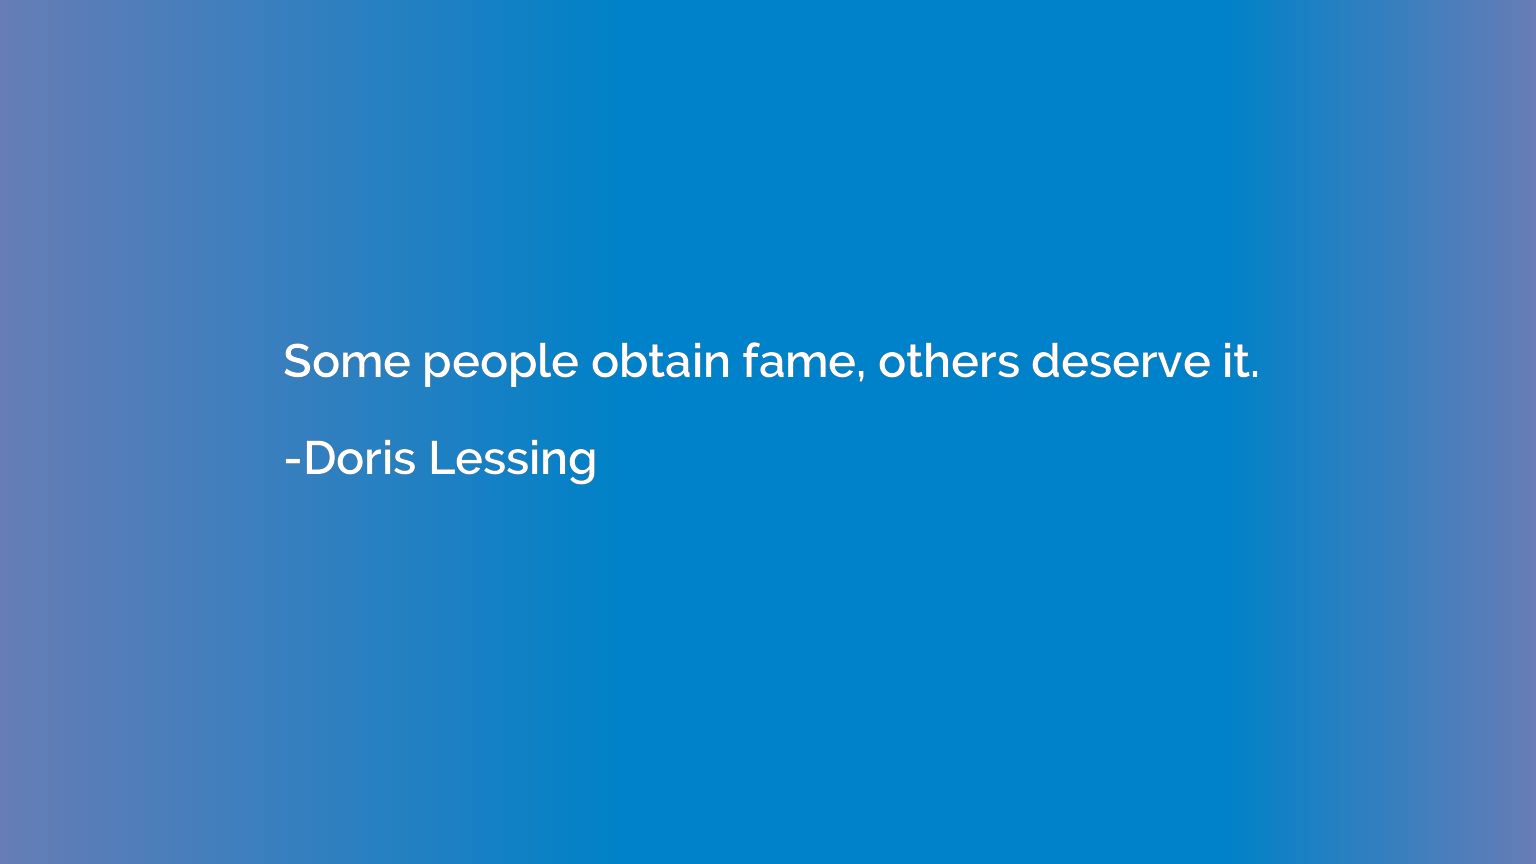 Some people obtain fame, others deserve it.